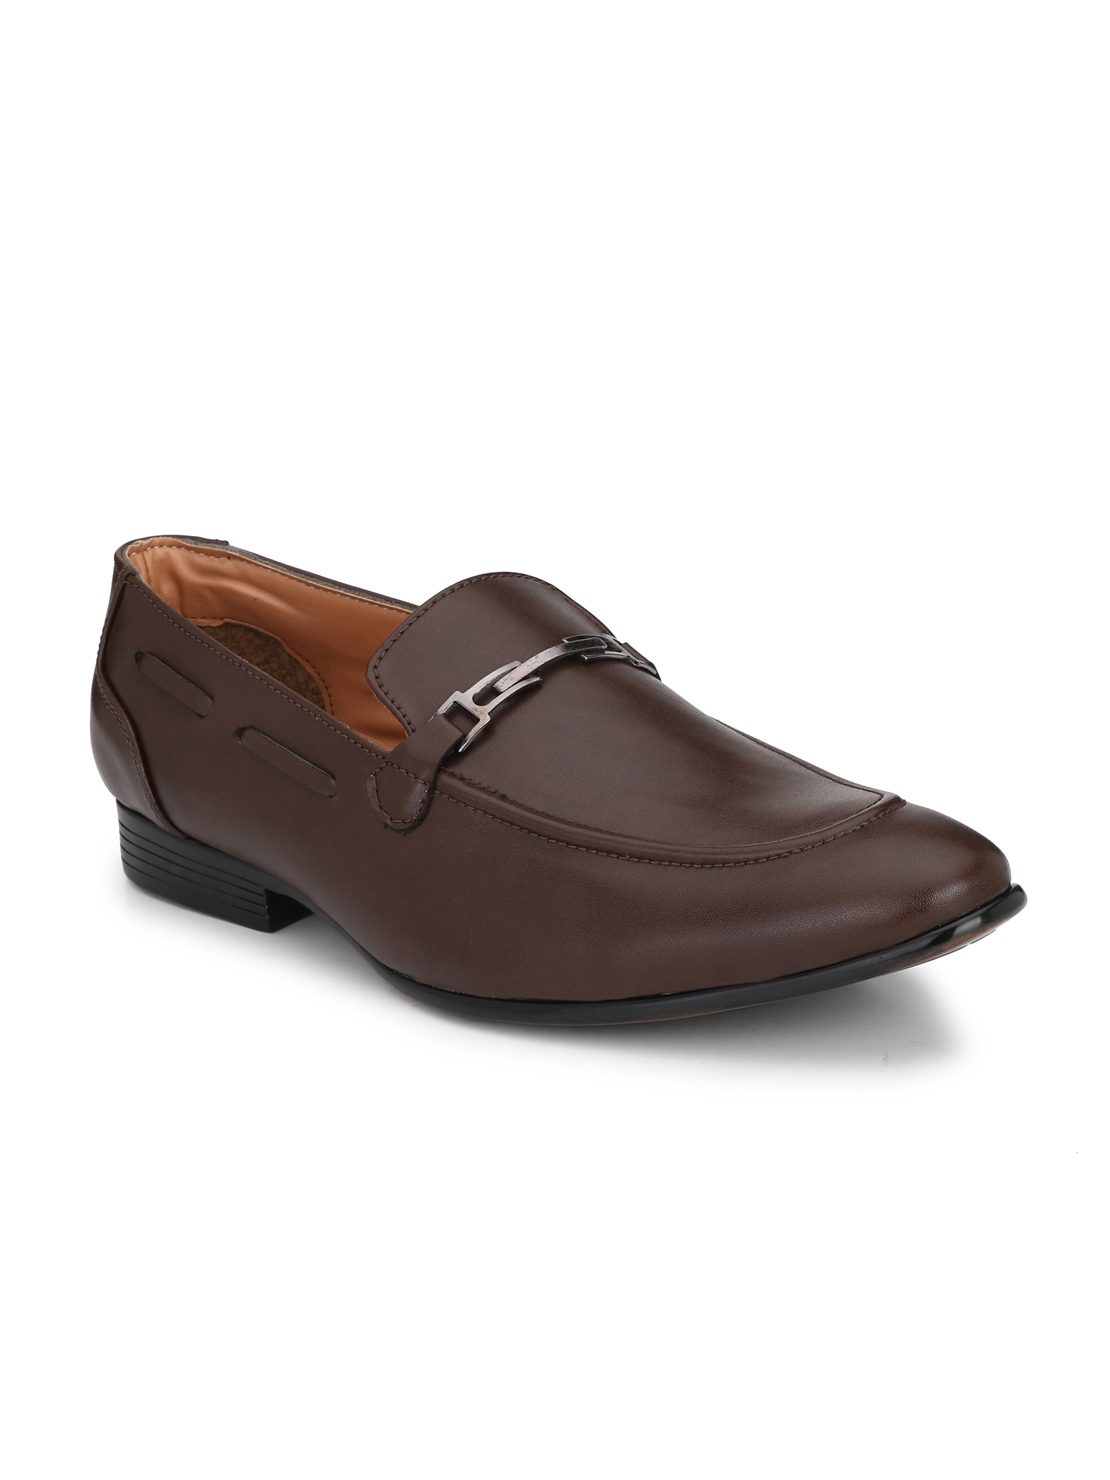 Guava | Guava Men's Penny formal Loafers - Brown